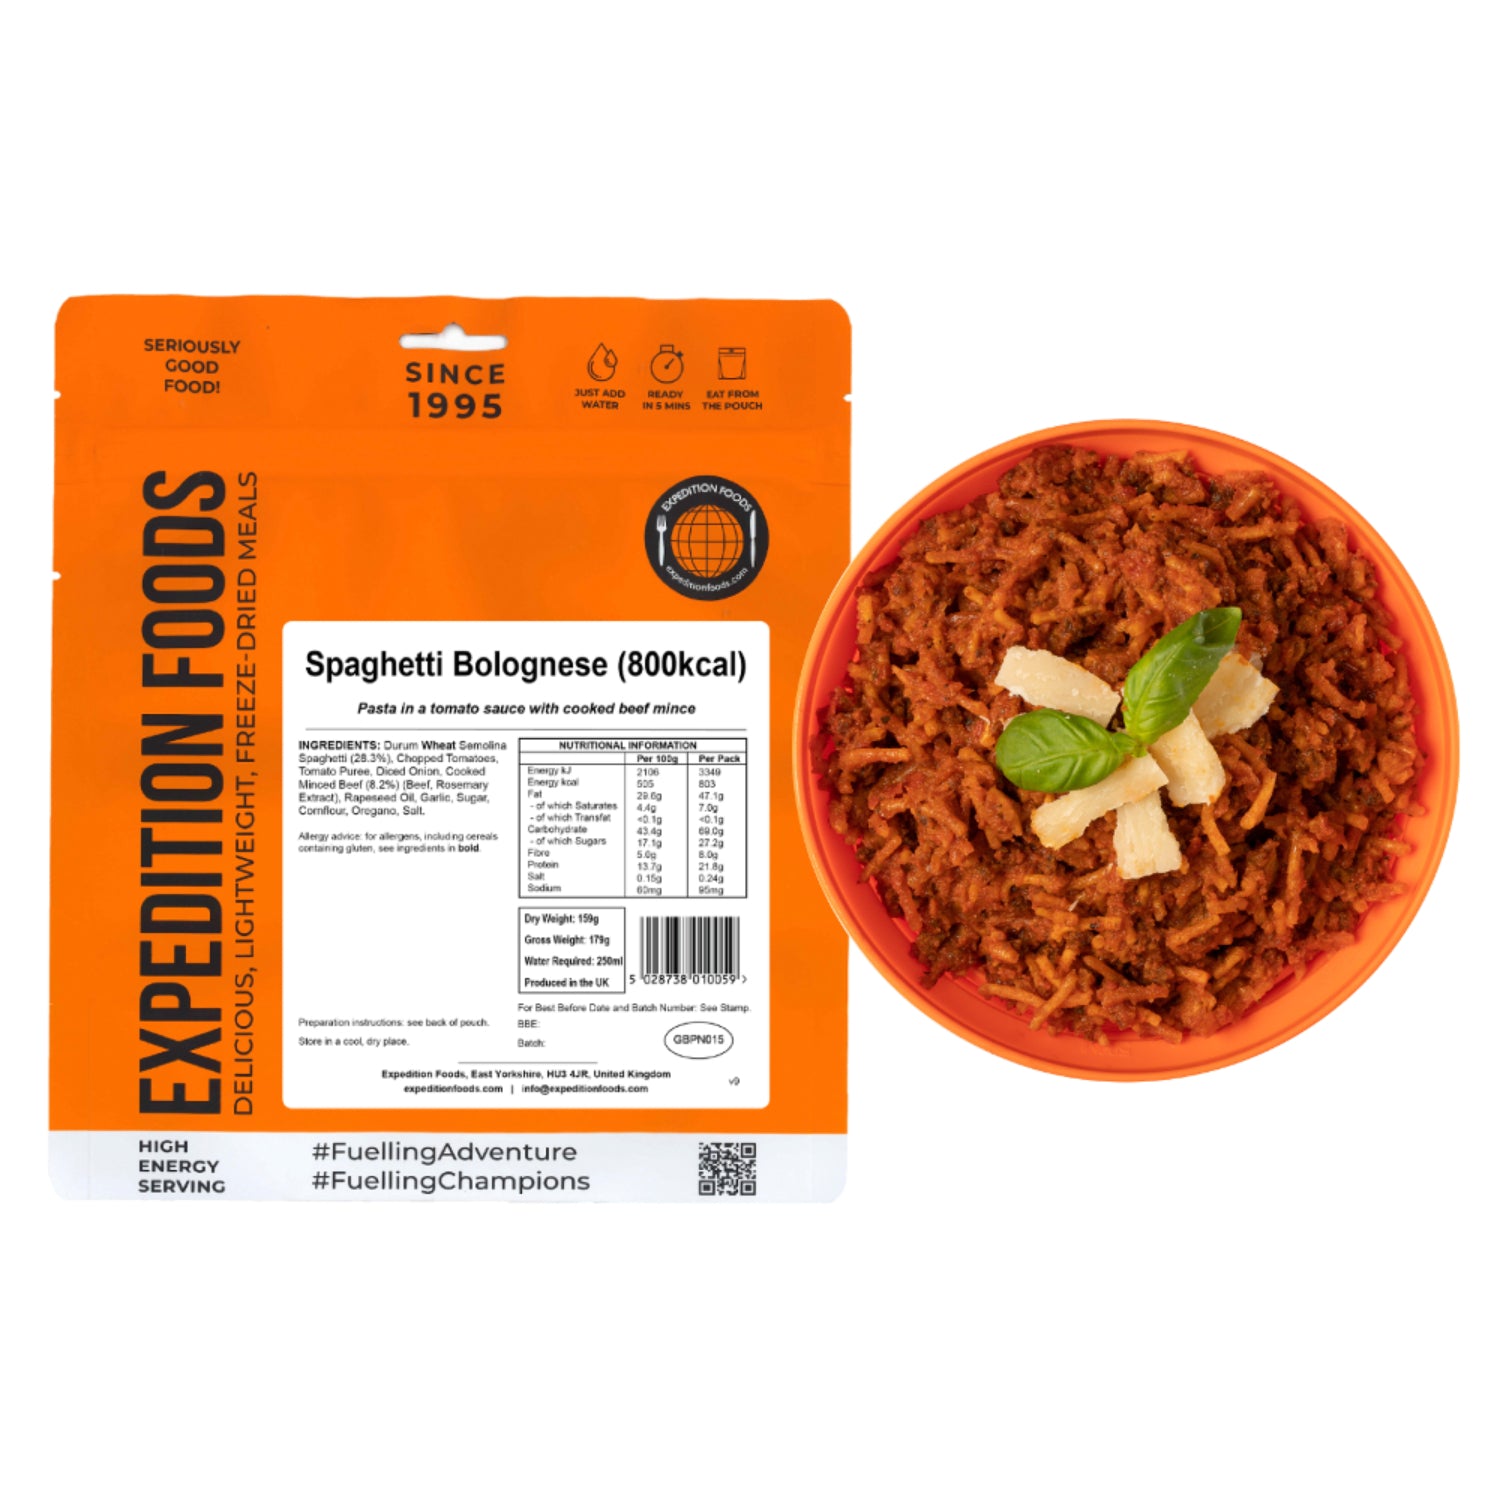 Expedition Foods Spaghetti Bolognese (800kcal), dried camping food pack